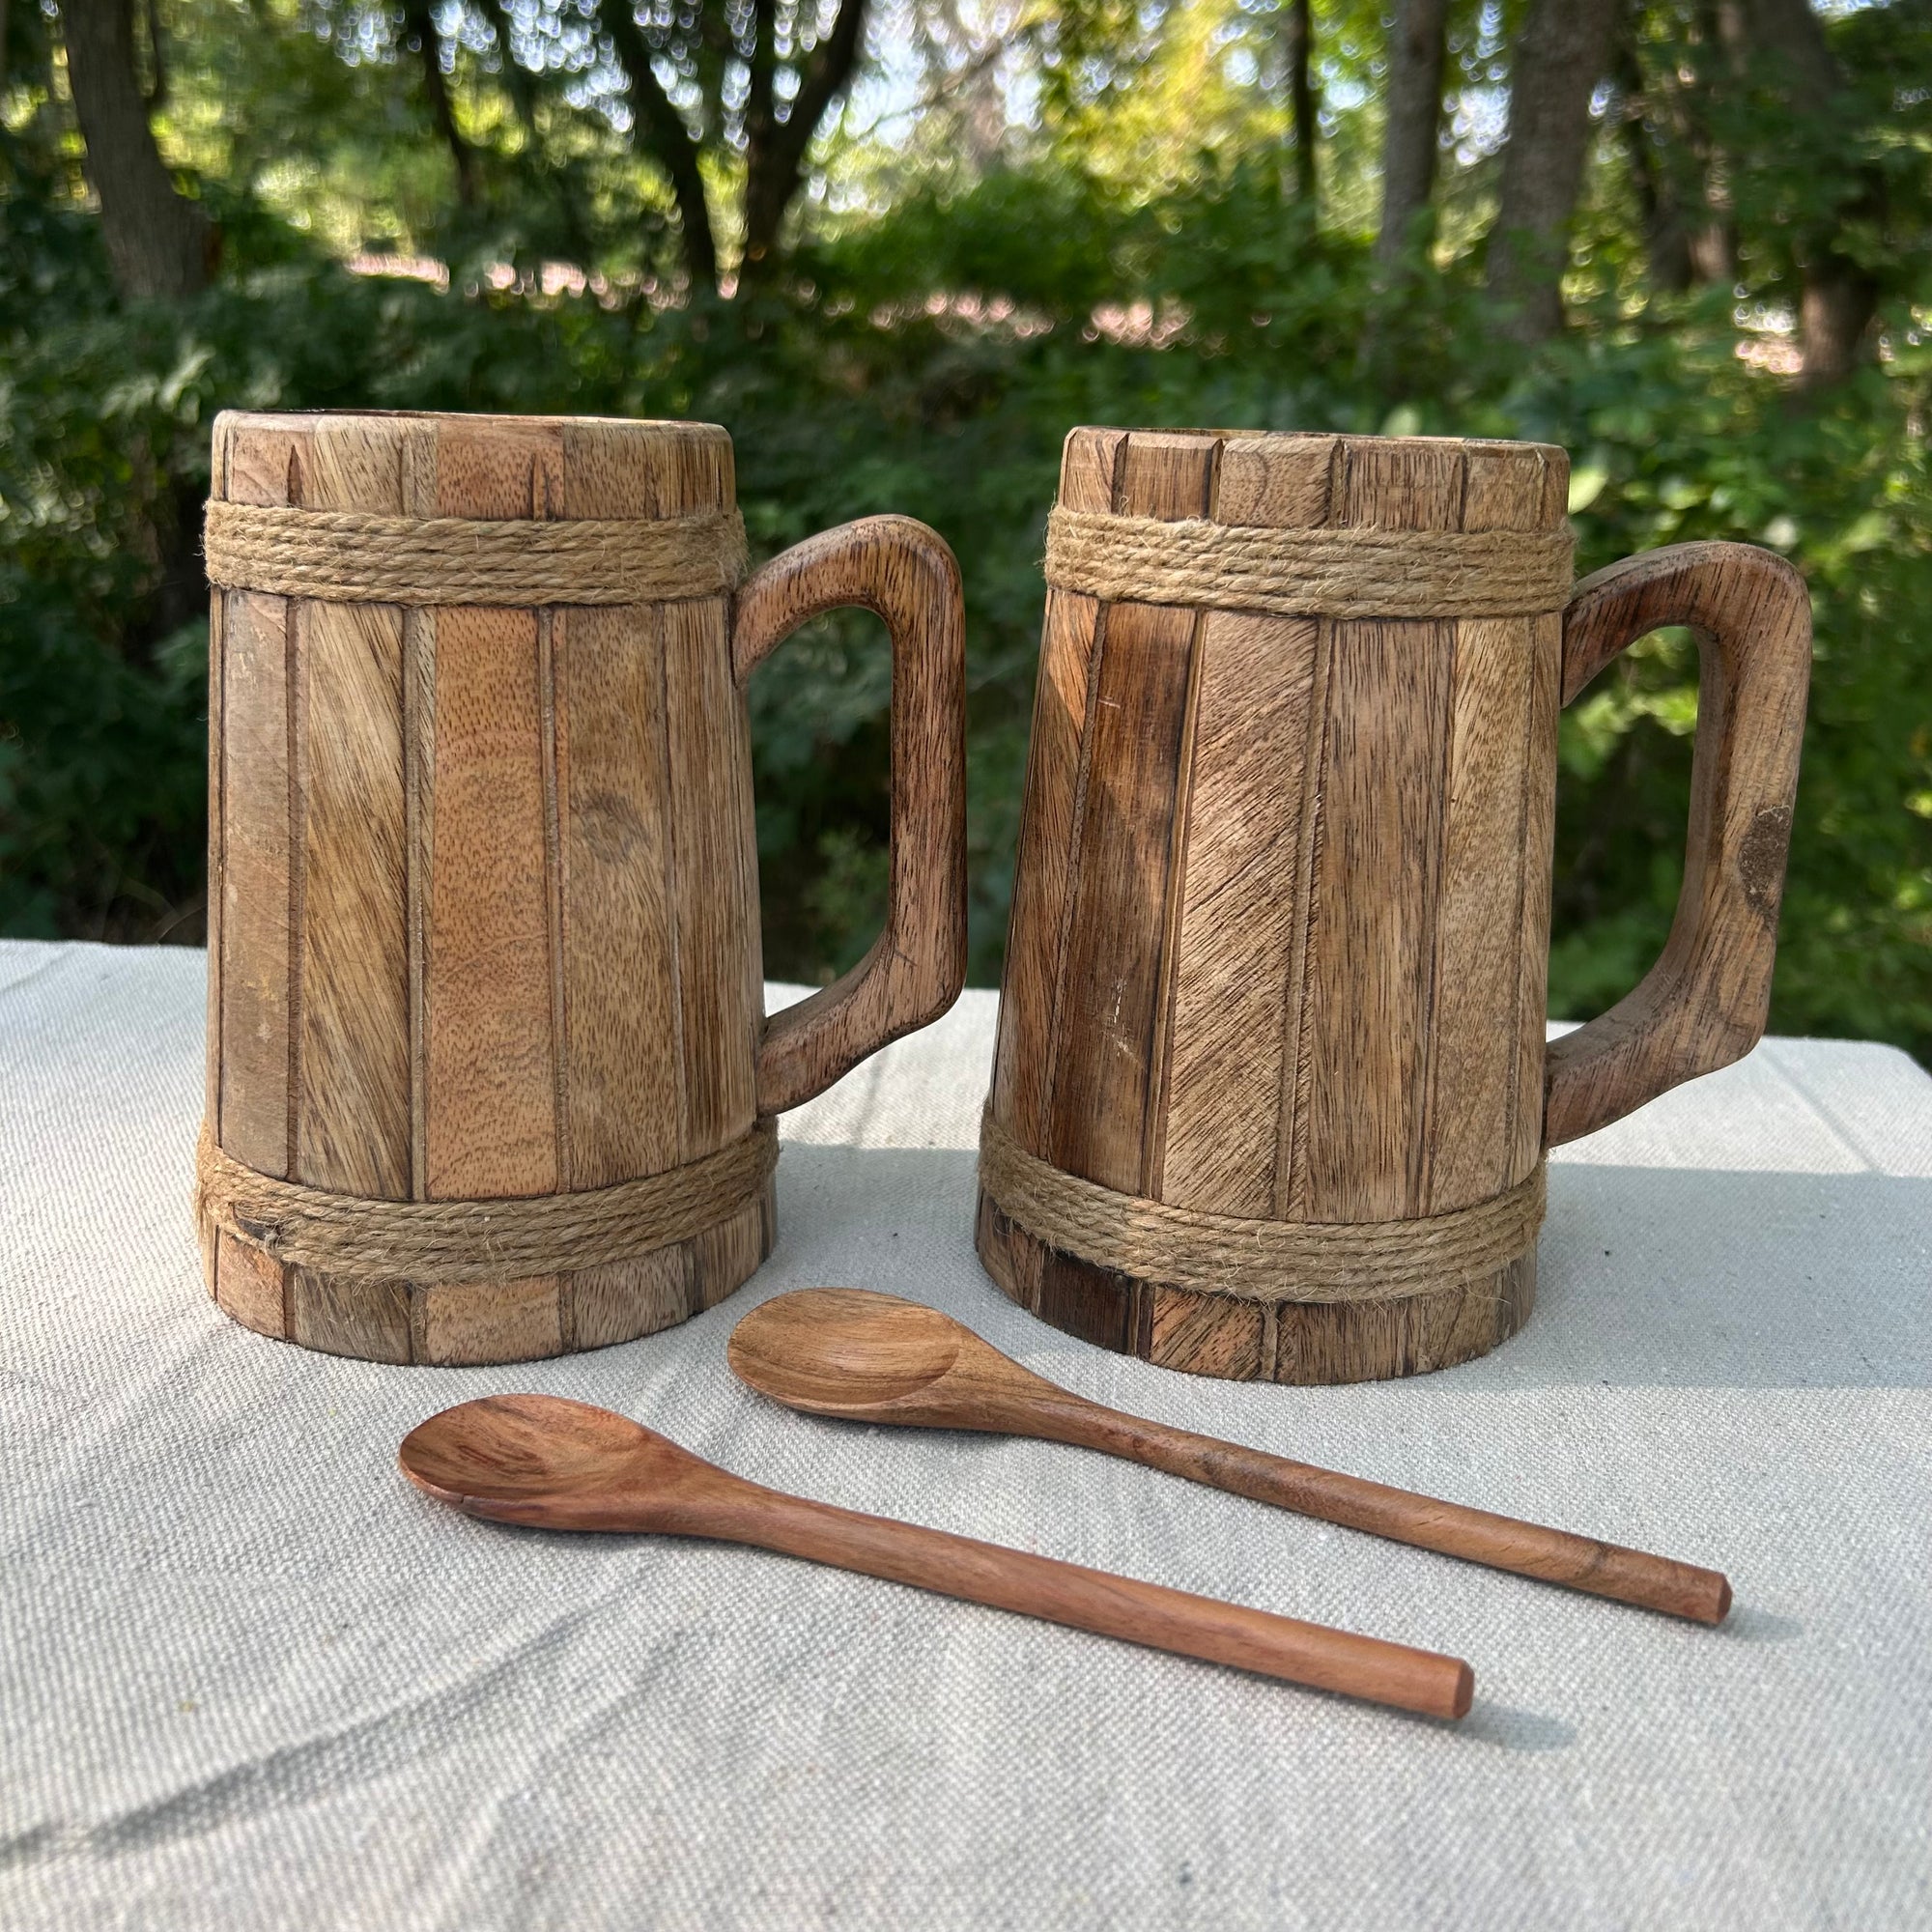 Wooden Mug with Cup